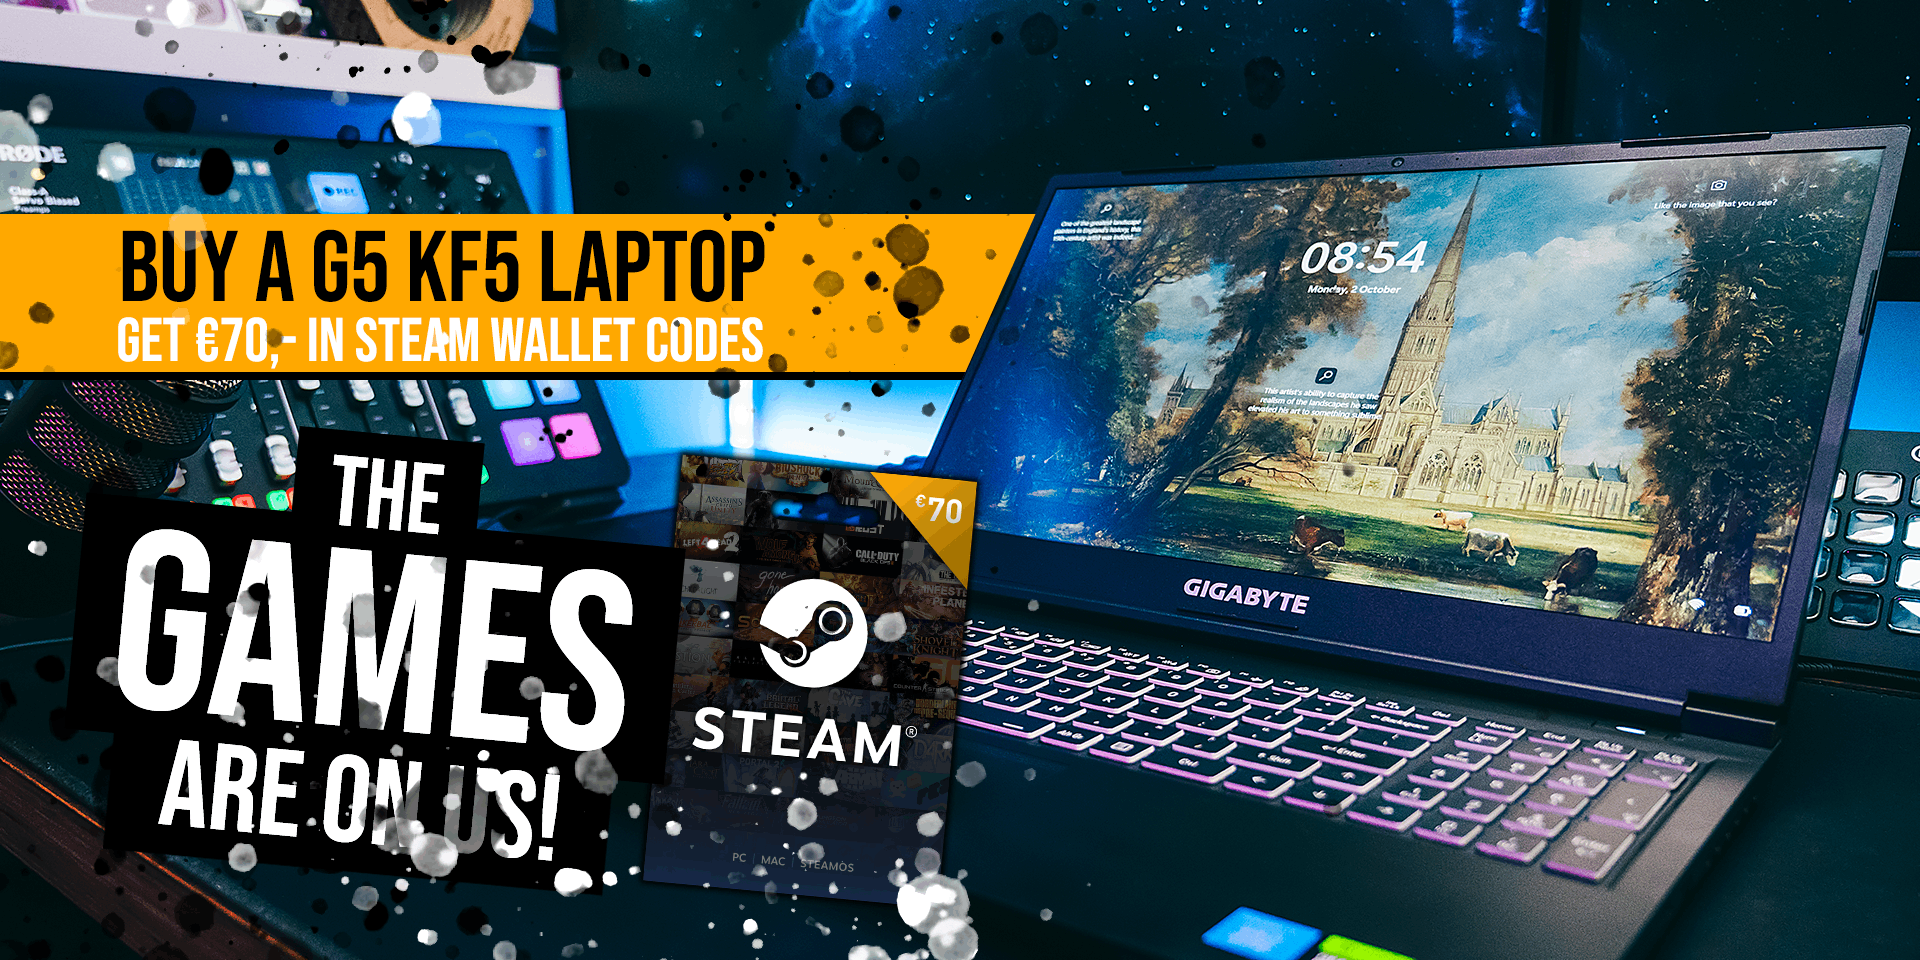 The games are on us! - Buy a G5 KF5 laptop and get a €70,- Steam wallet code